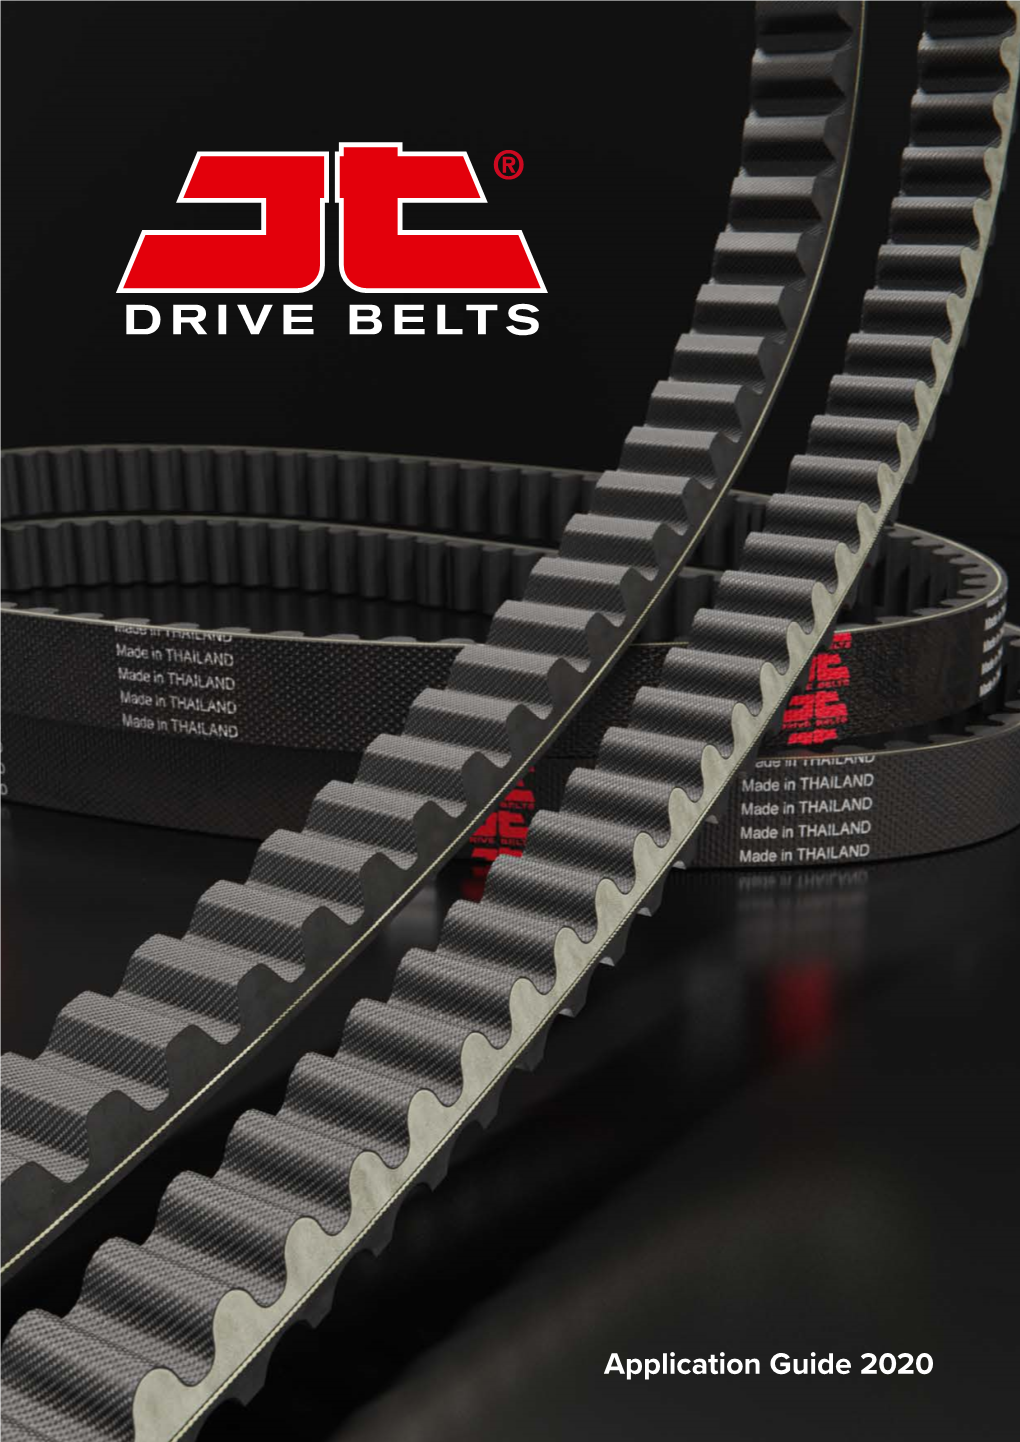 JT Drive Belts Brings Decades of Manufacturing Experience to Introduce a Range of High Quality CVT Belts